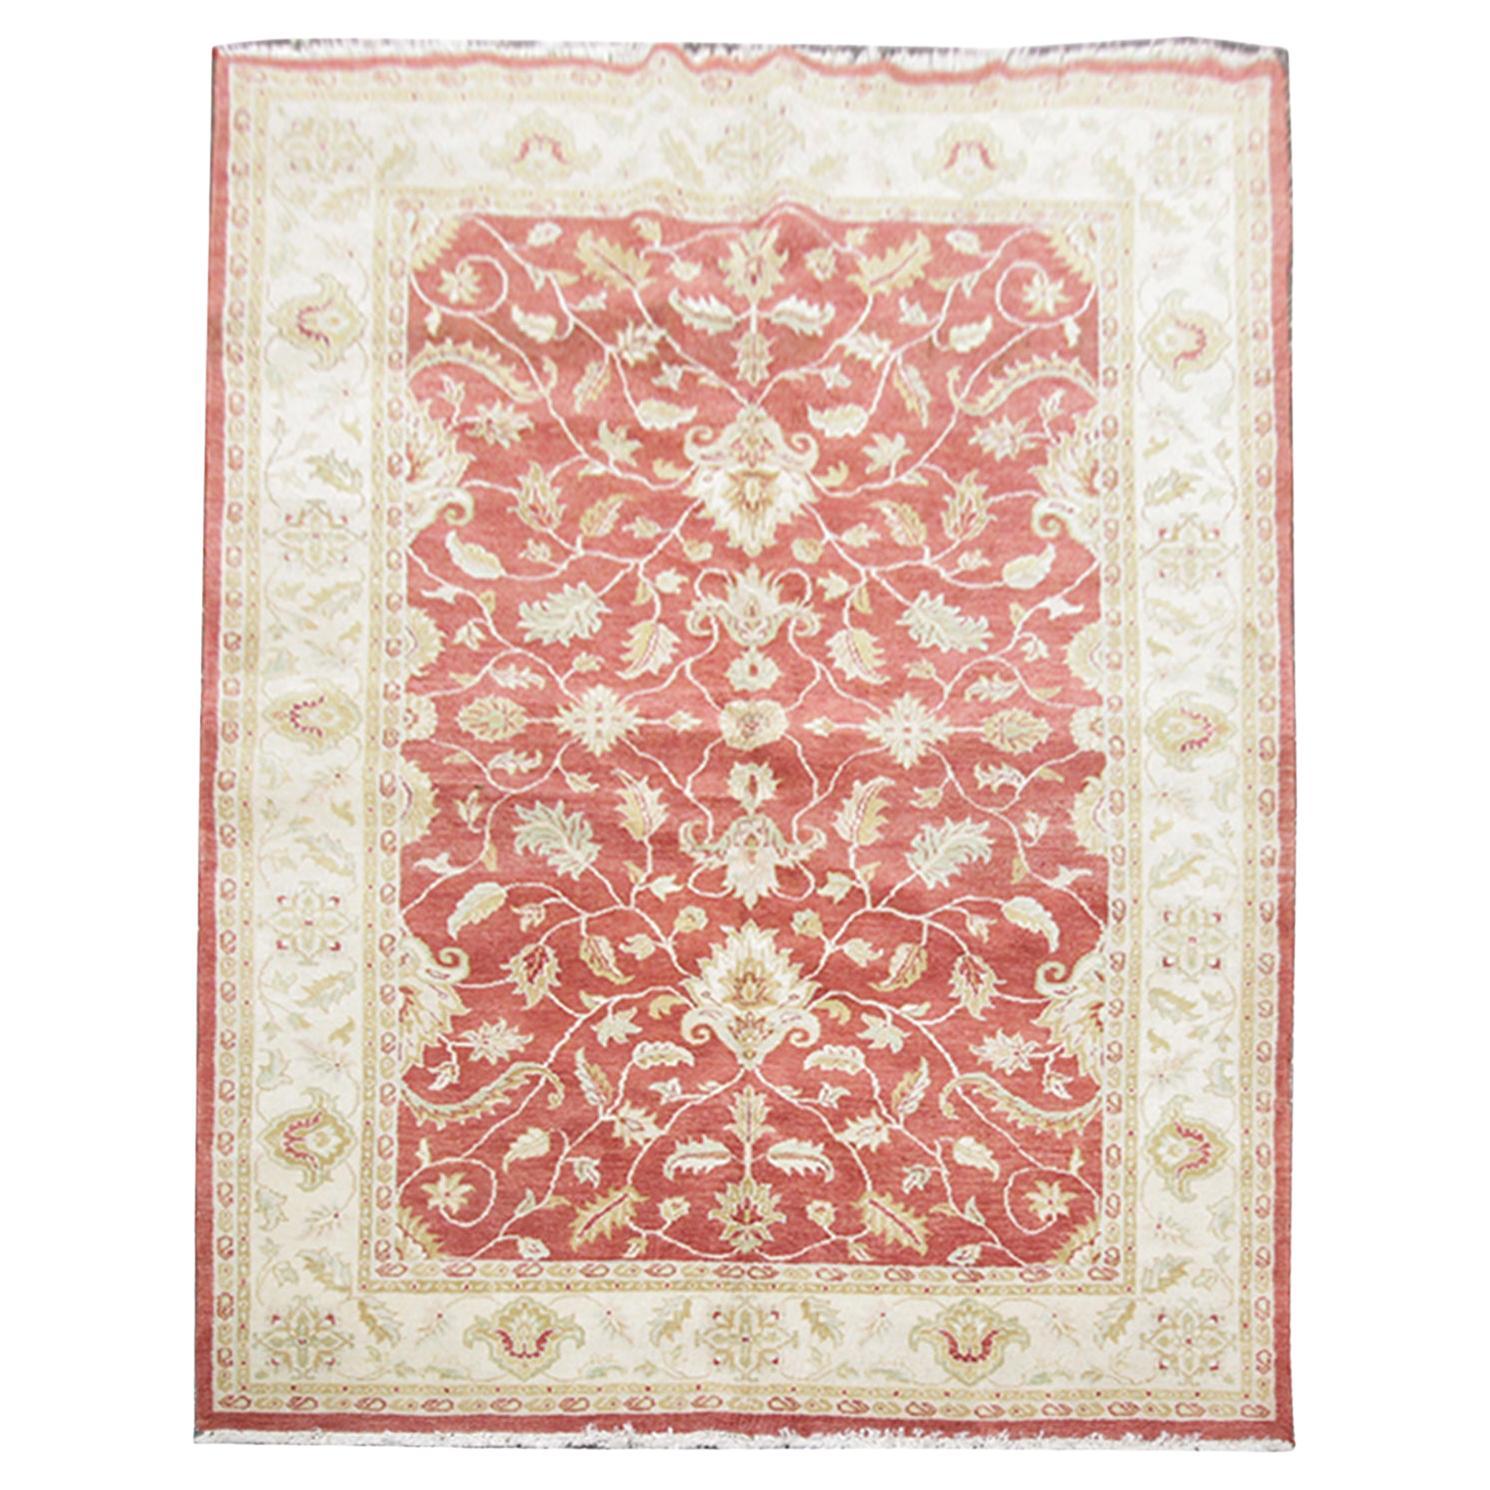 Oriental Red Living Room Rugs Handmade Carpet Floral Ziegler Rugs for Sale CHR73 For Sale